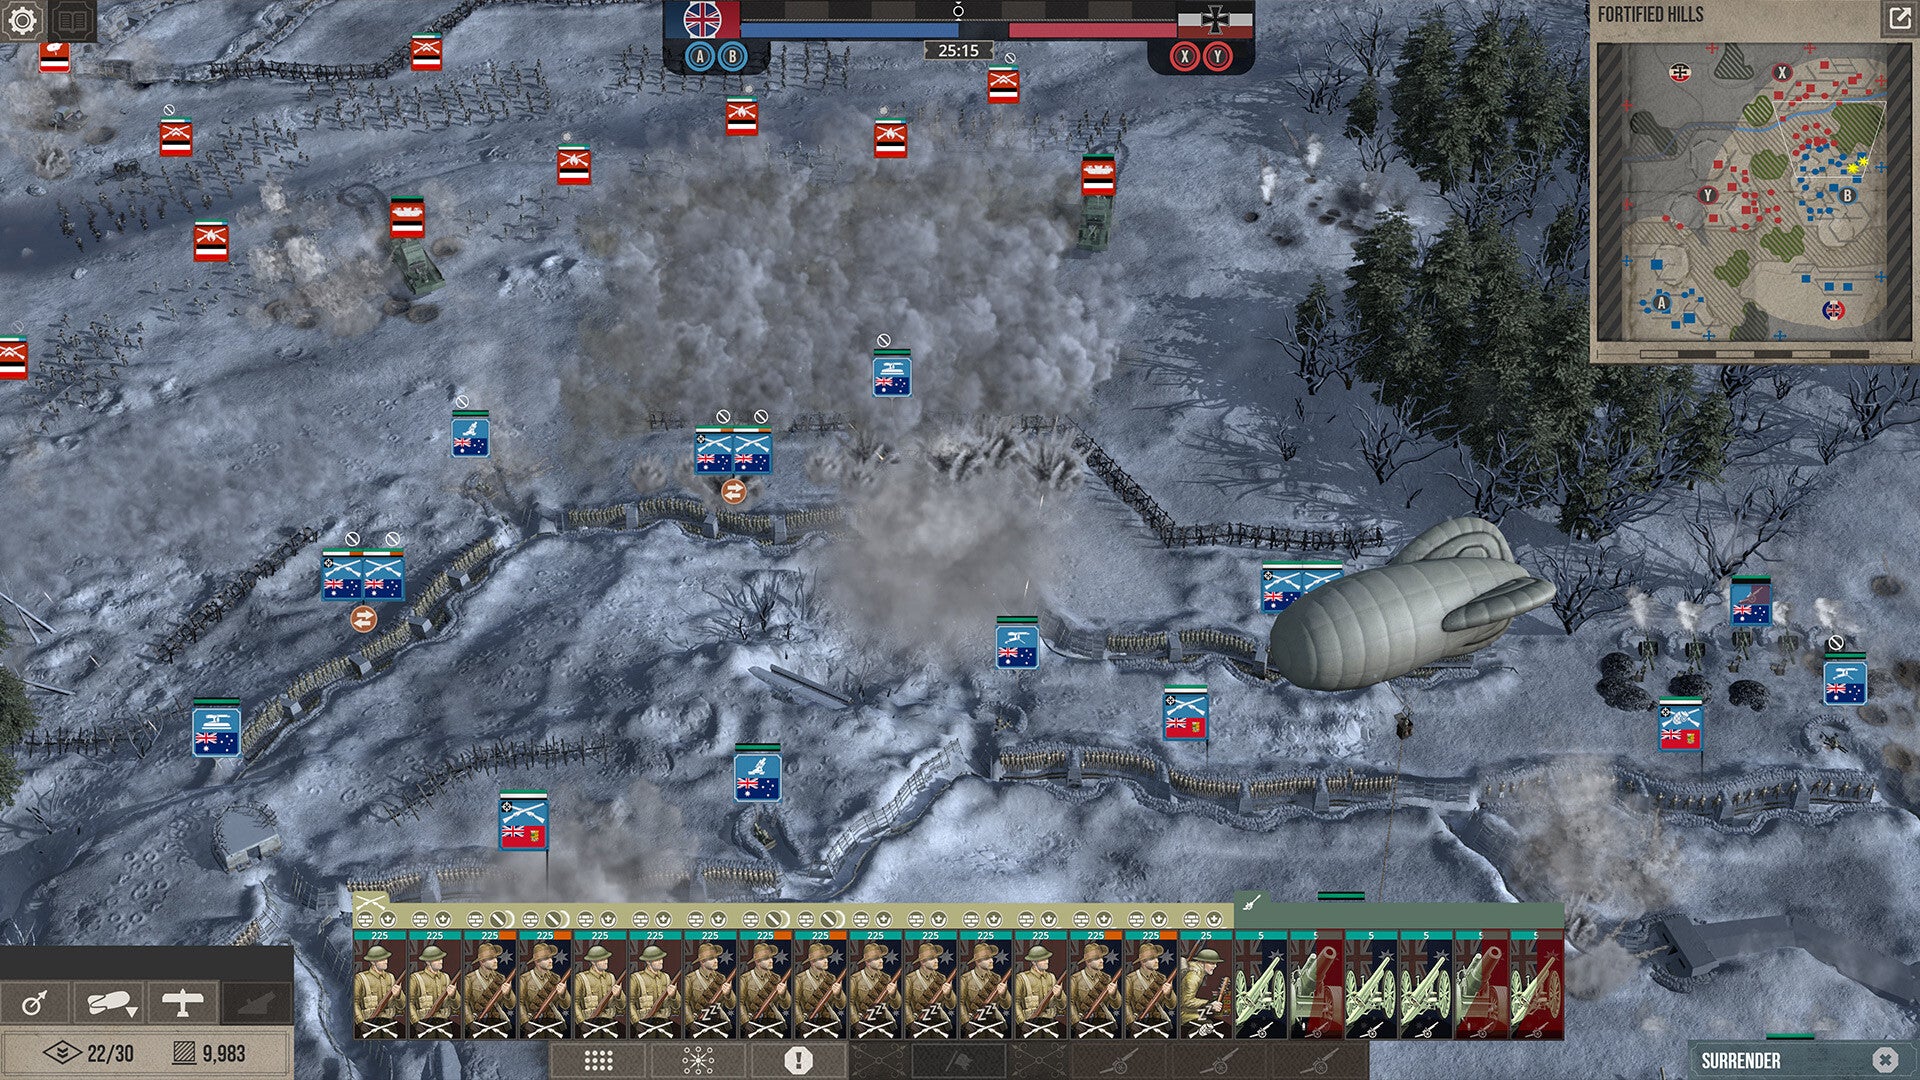 The RTS battles themselves are a disappointment (though it's great to see a game with so much Australian representation, something loads of strategy games miss!) (Screenshot: The Great War)